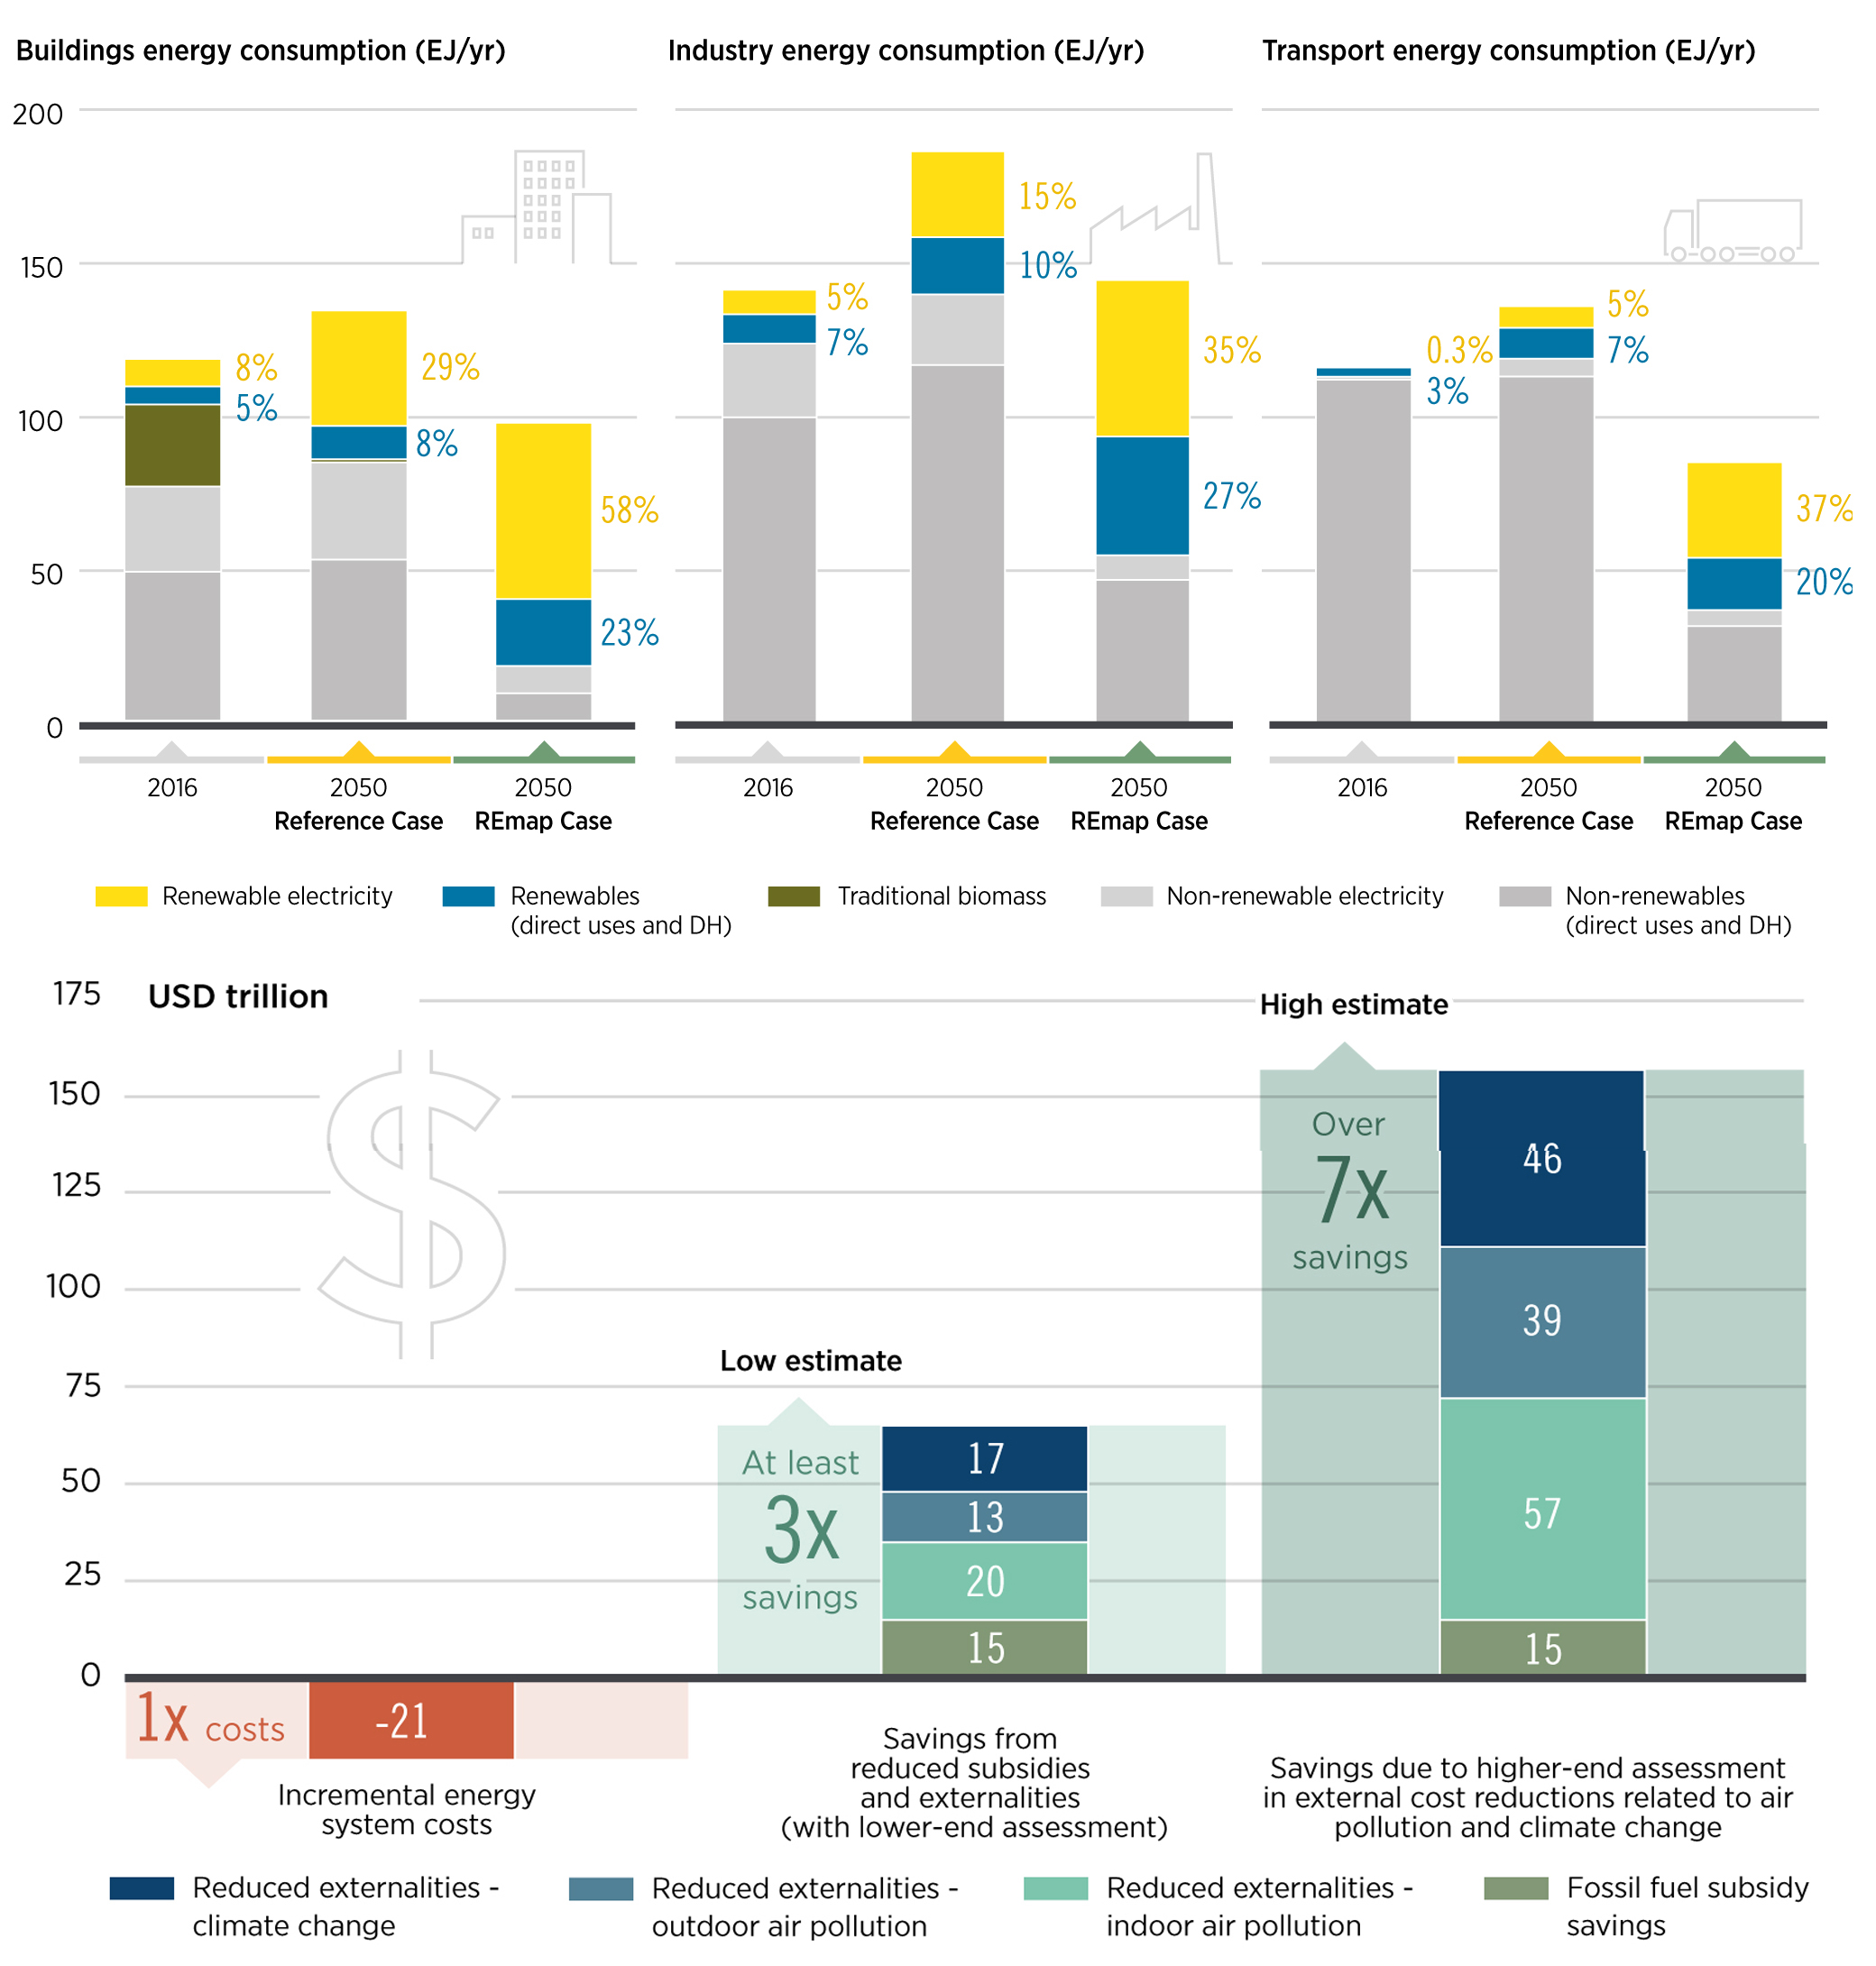 Fig. 10. Fossil and RES consumption in buildings, industry and transport; basic and accelerated scenarios, 2016 and 2050 (EJ/year). Financial benefits from accelerating energy transfer versus costs - reducing system costs (investment, operating costs), subsidy savings over the 2016-2050 period ($ trillion). Source: IRENA report Global Energy Transformation: A Roadmap to 2050, April 2019.